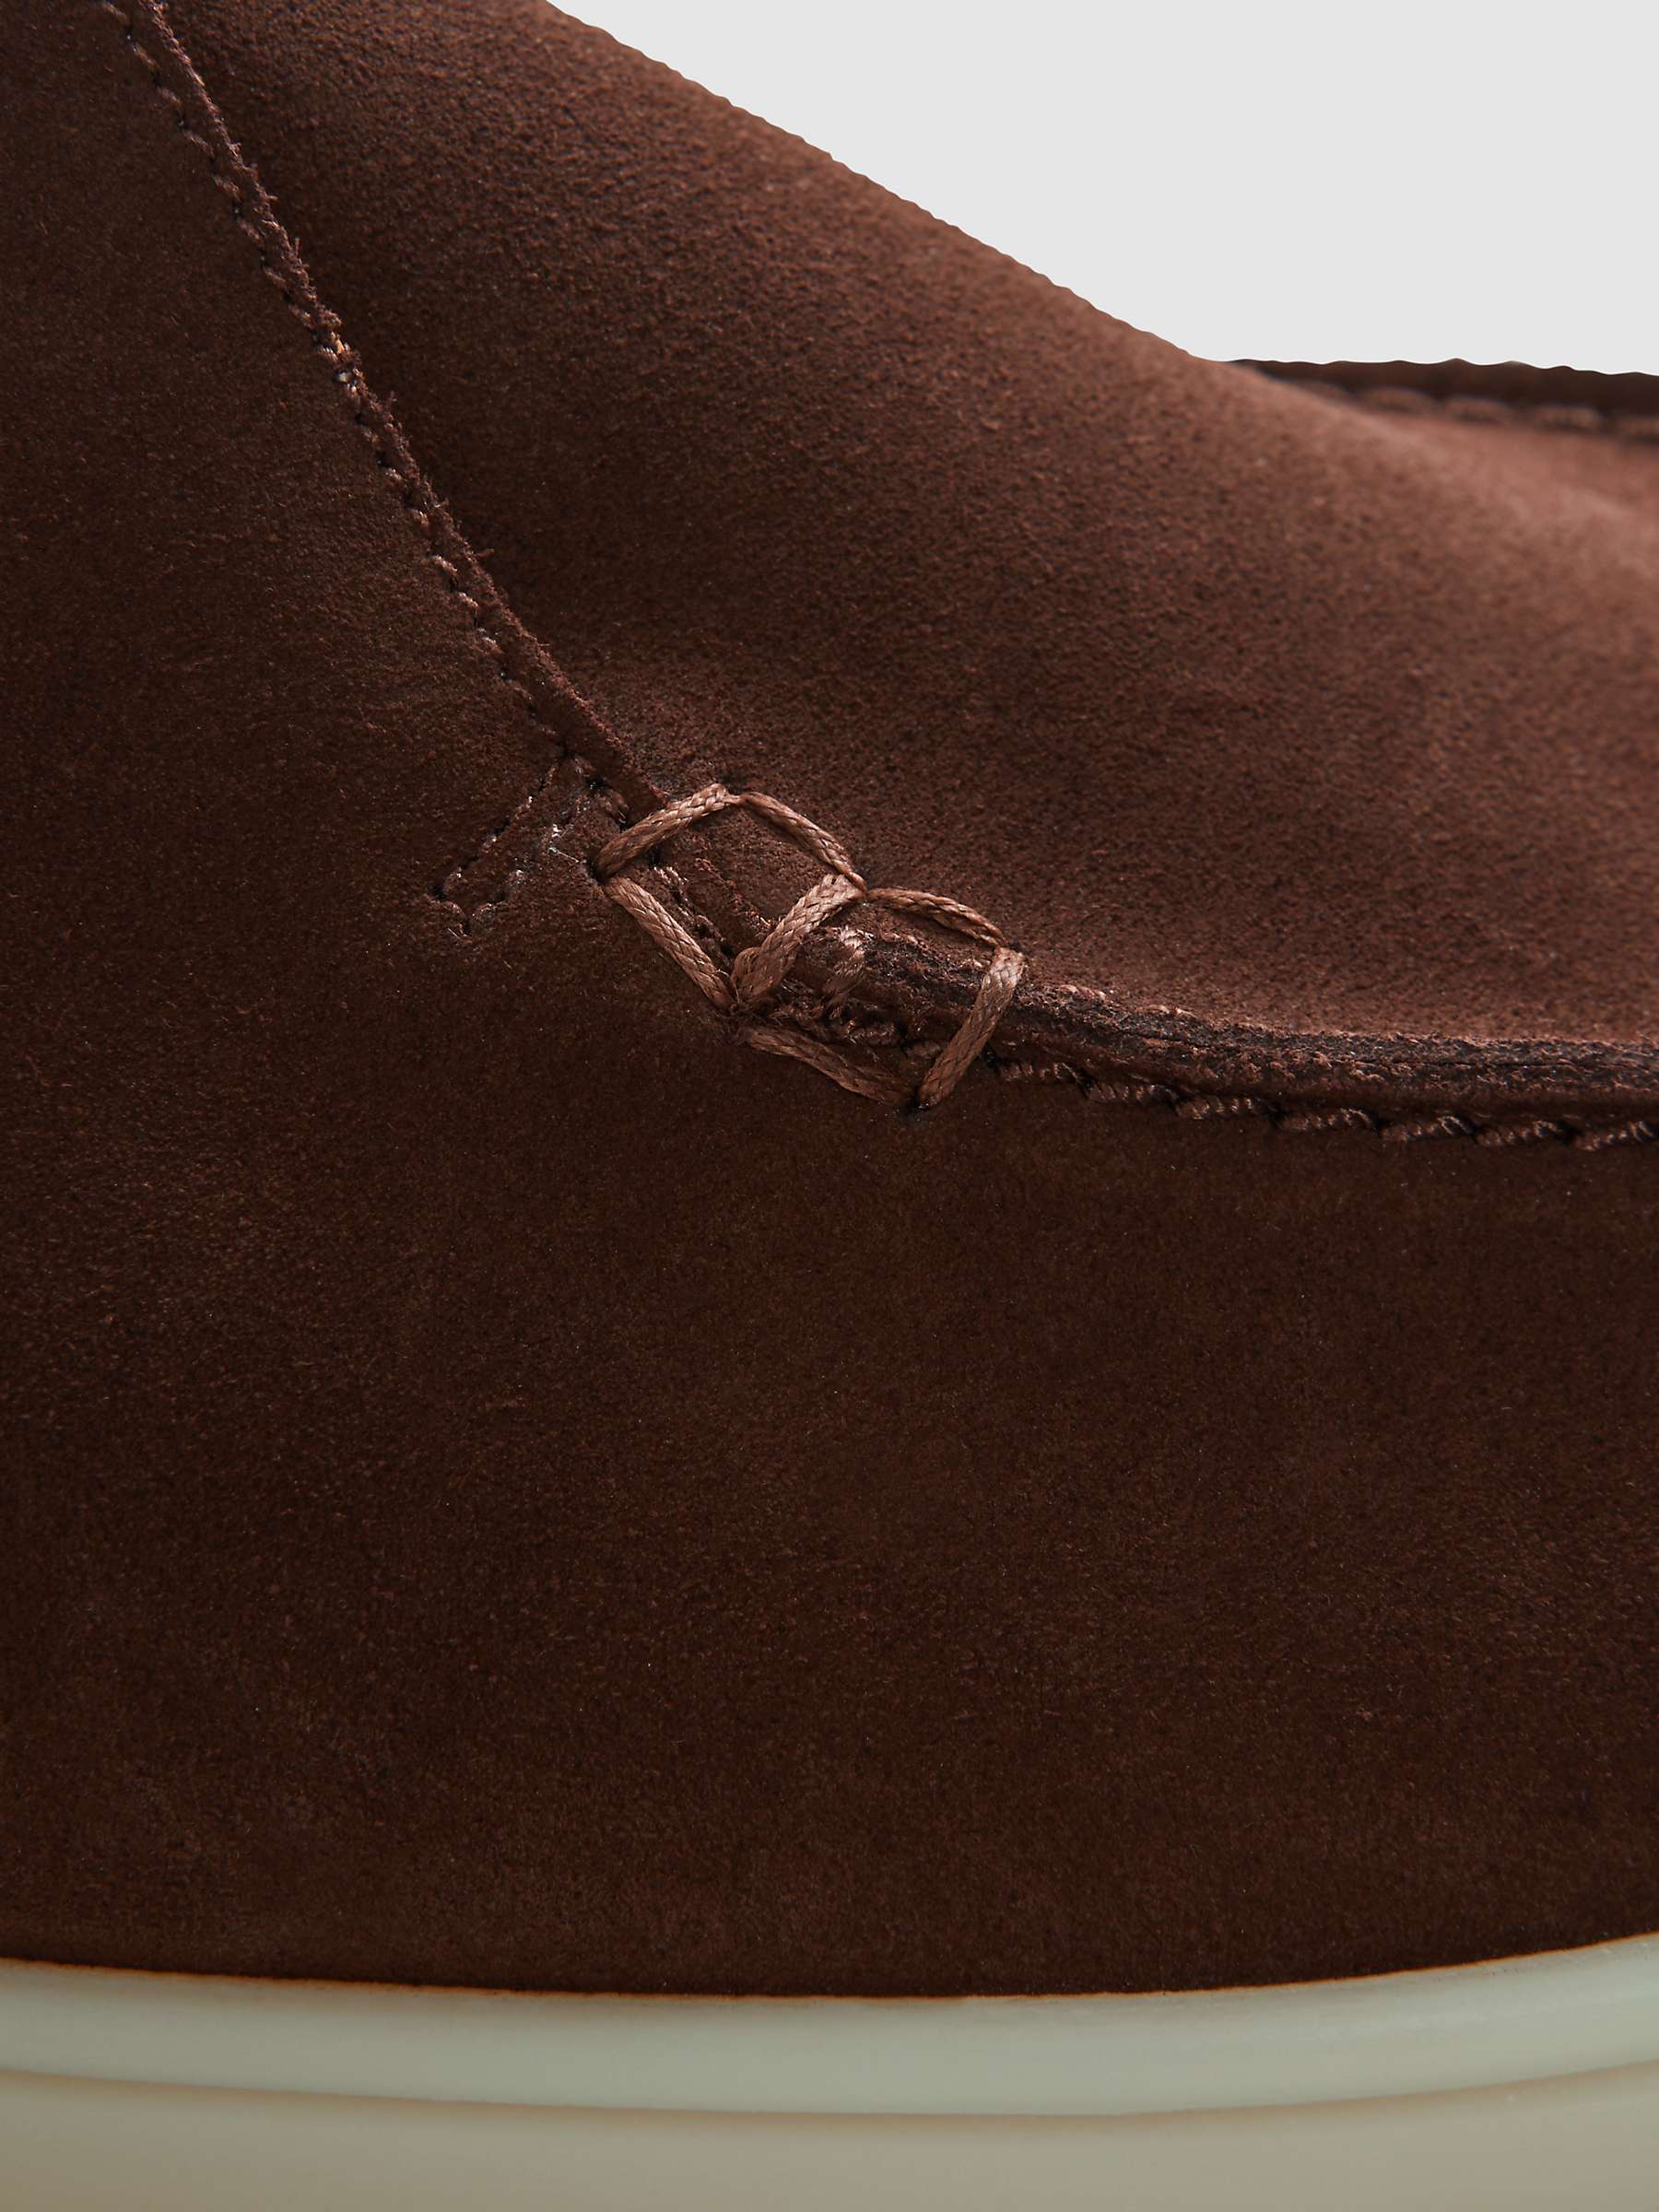 Buy Reiss Kason Suede Slip-On Moccasin Boots, Brown Online at johnlewis.com